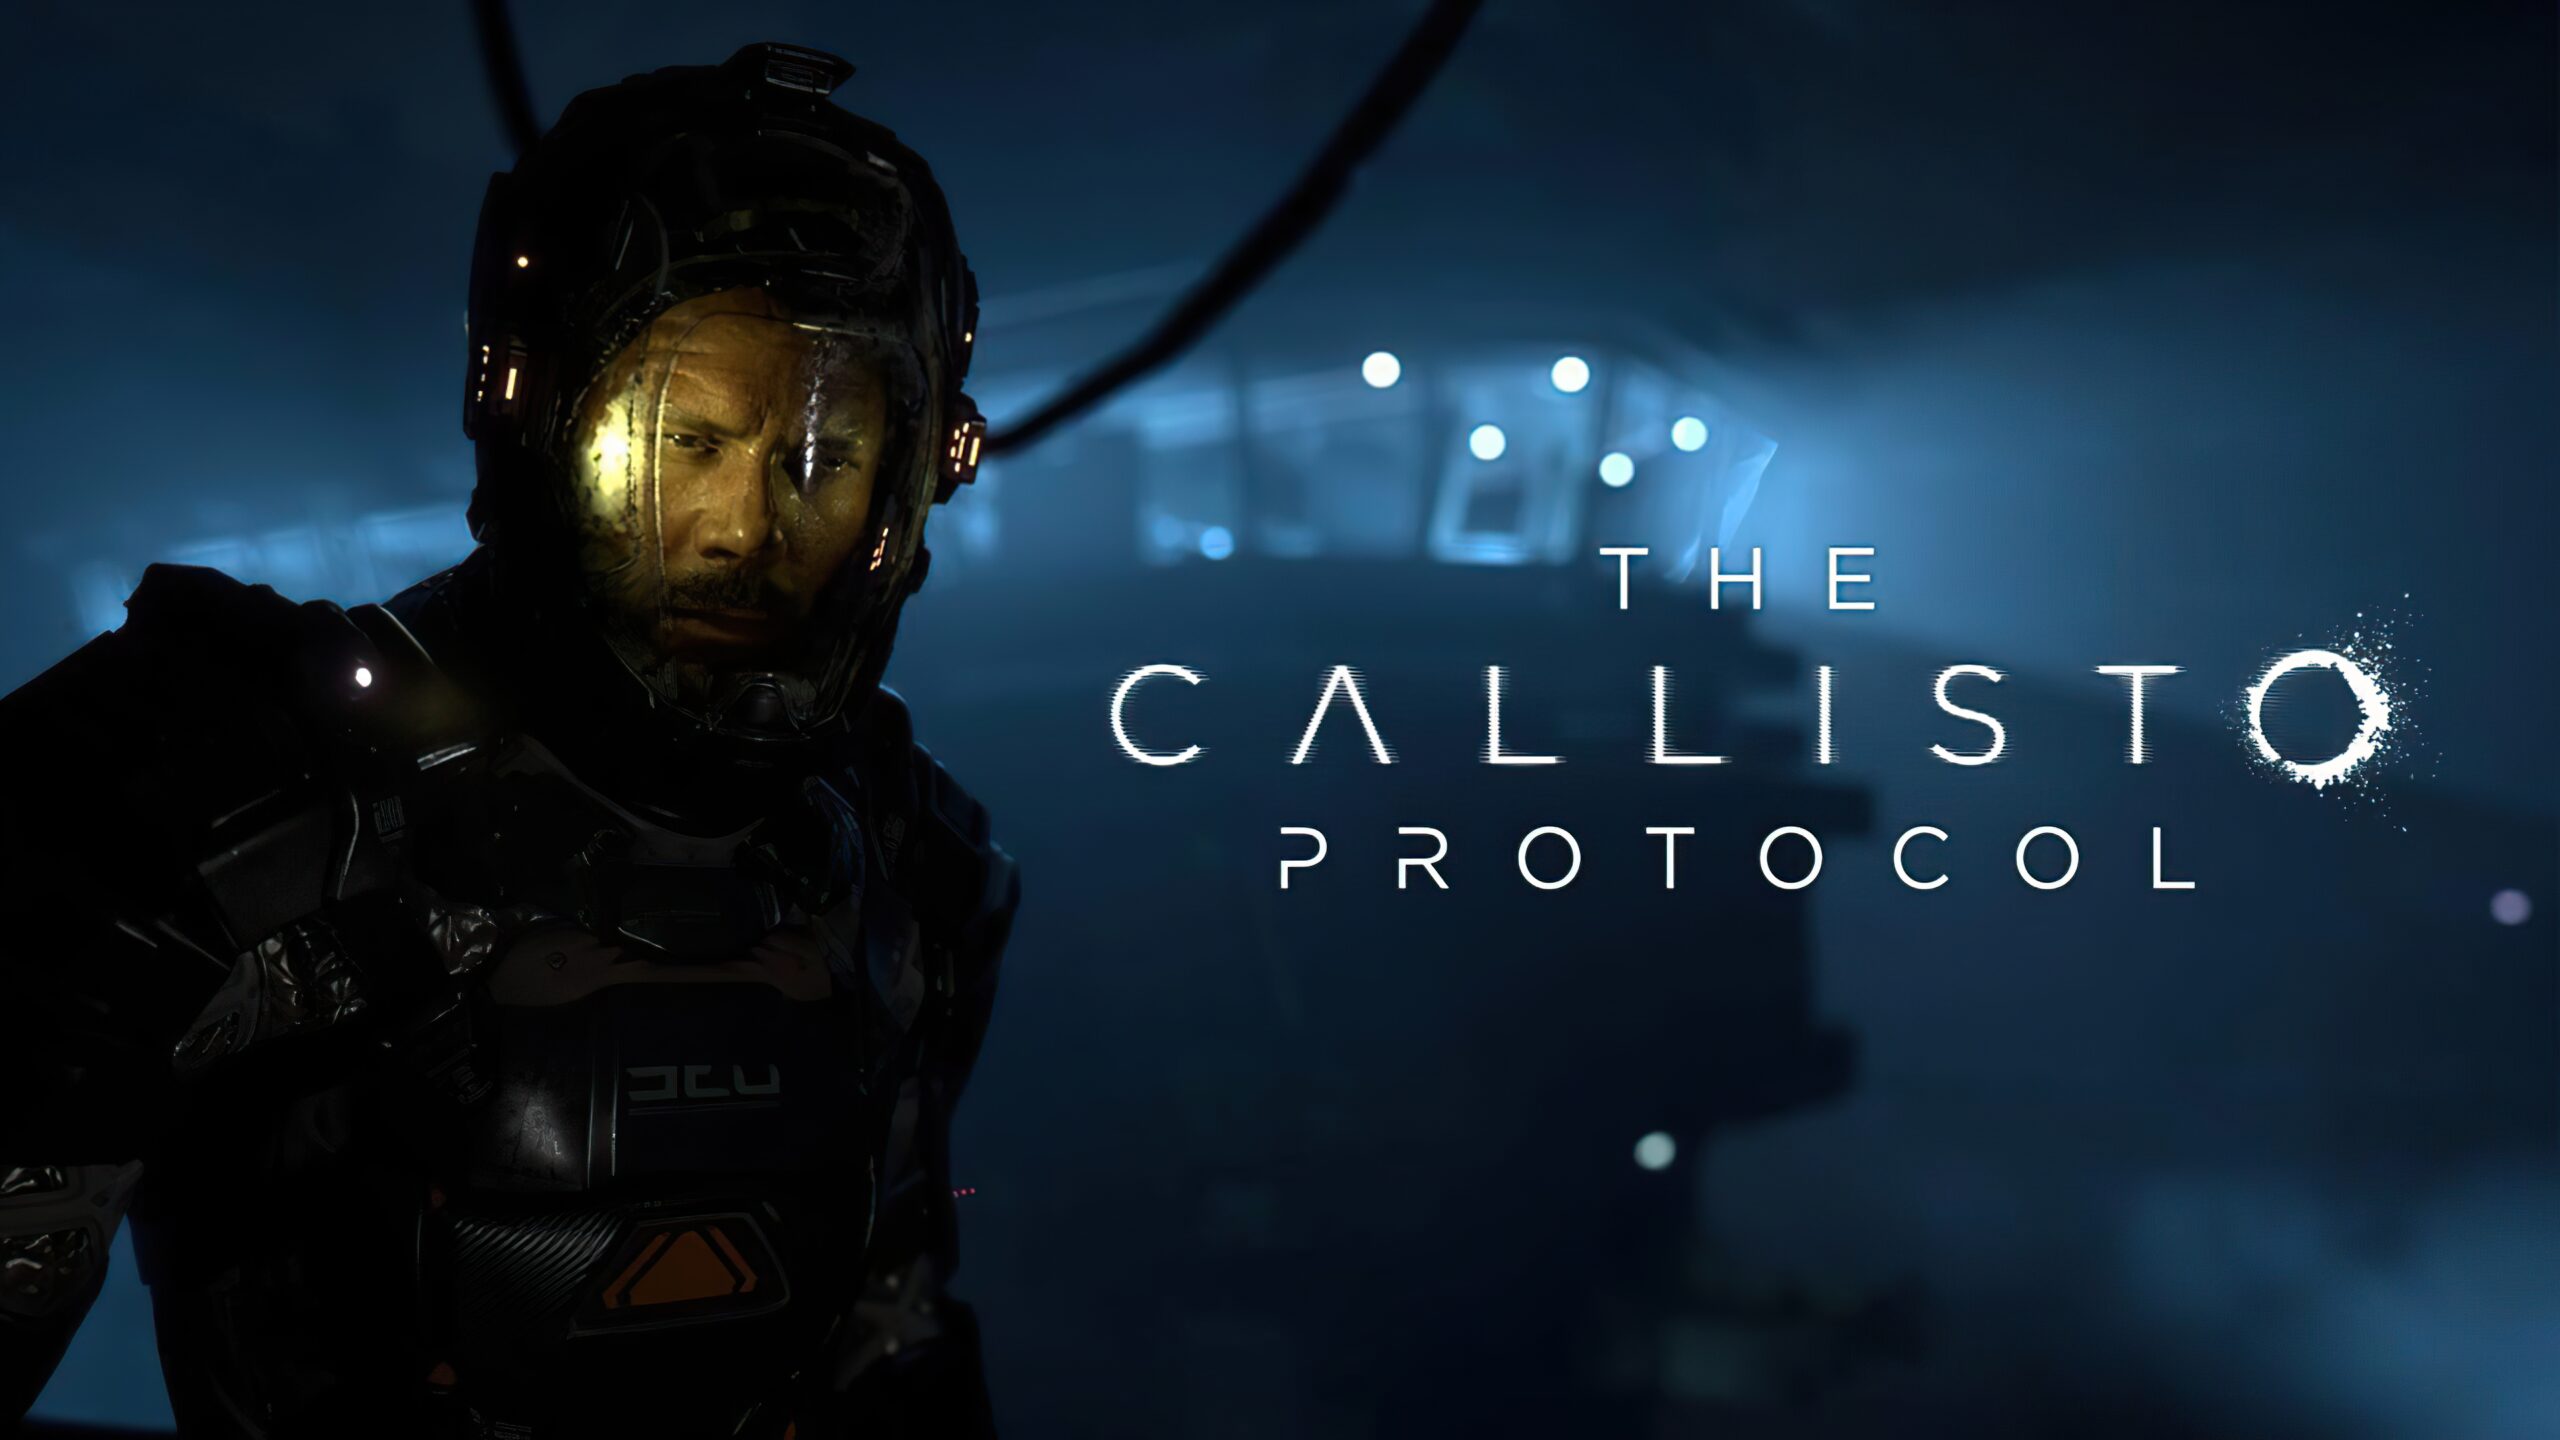 The Callisto Protocol review: A dead frustrating space